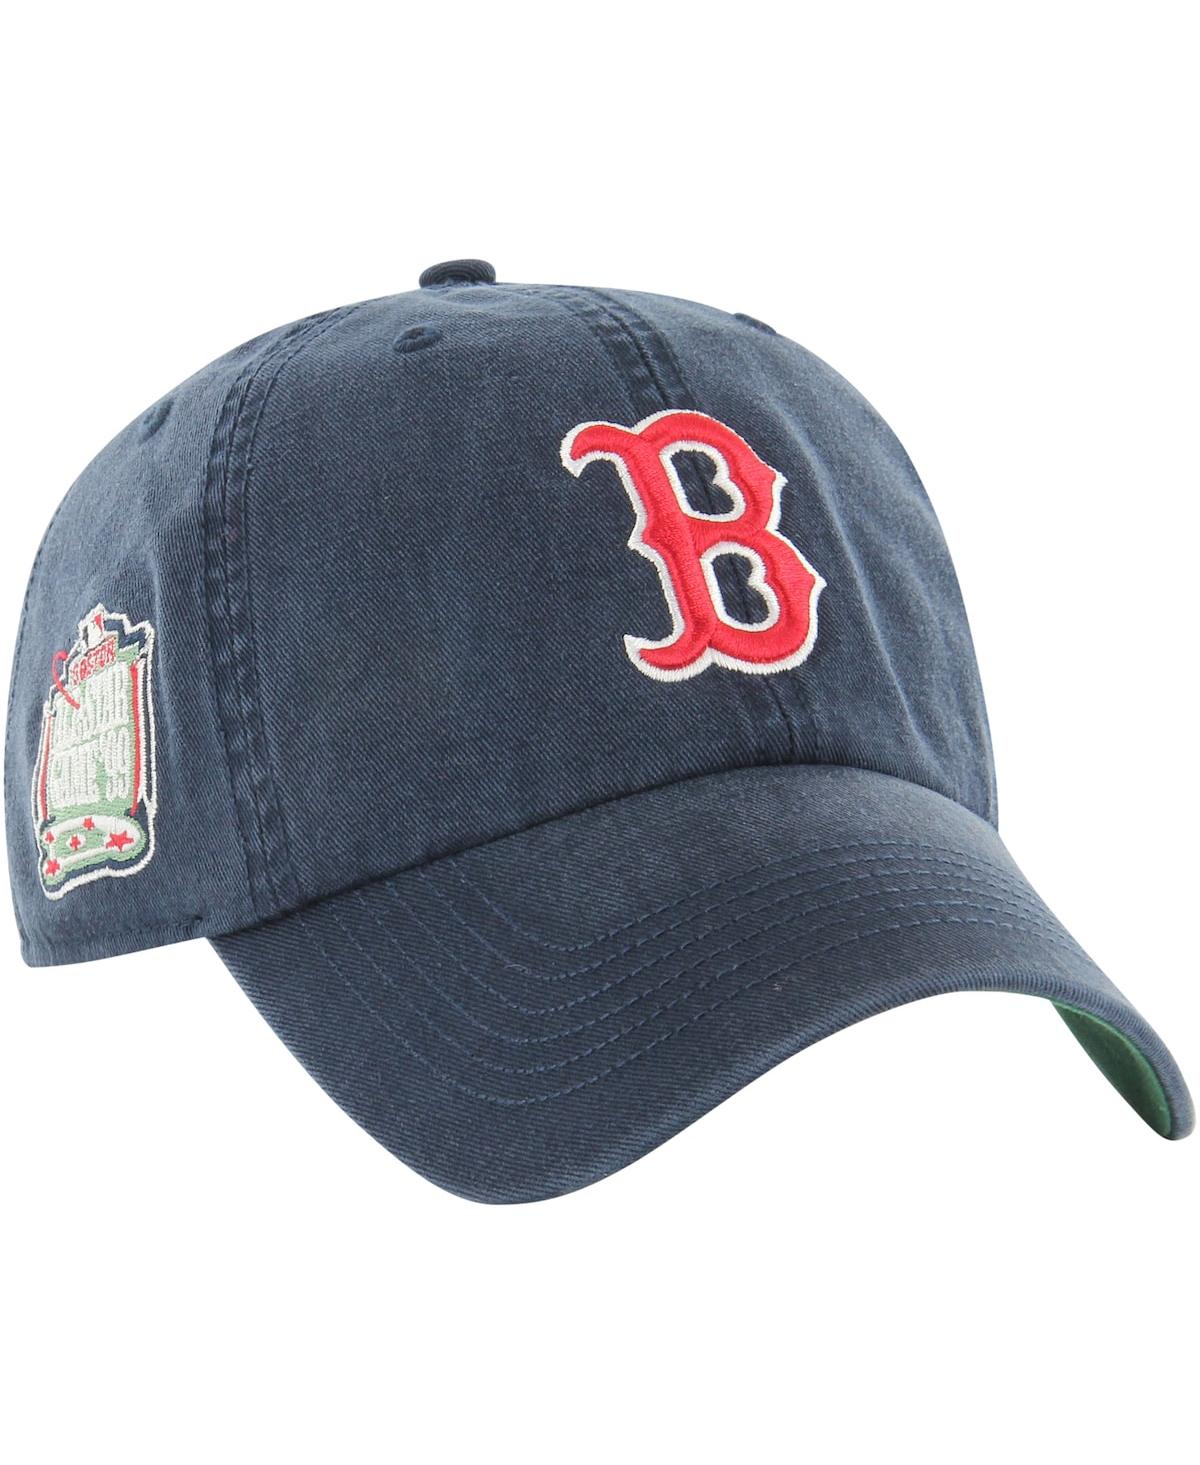 Men's '47 Brand Navy Boston Red Sox Sure Shot Classic Franchise Fitted Hat - Navy